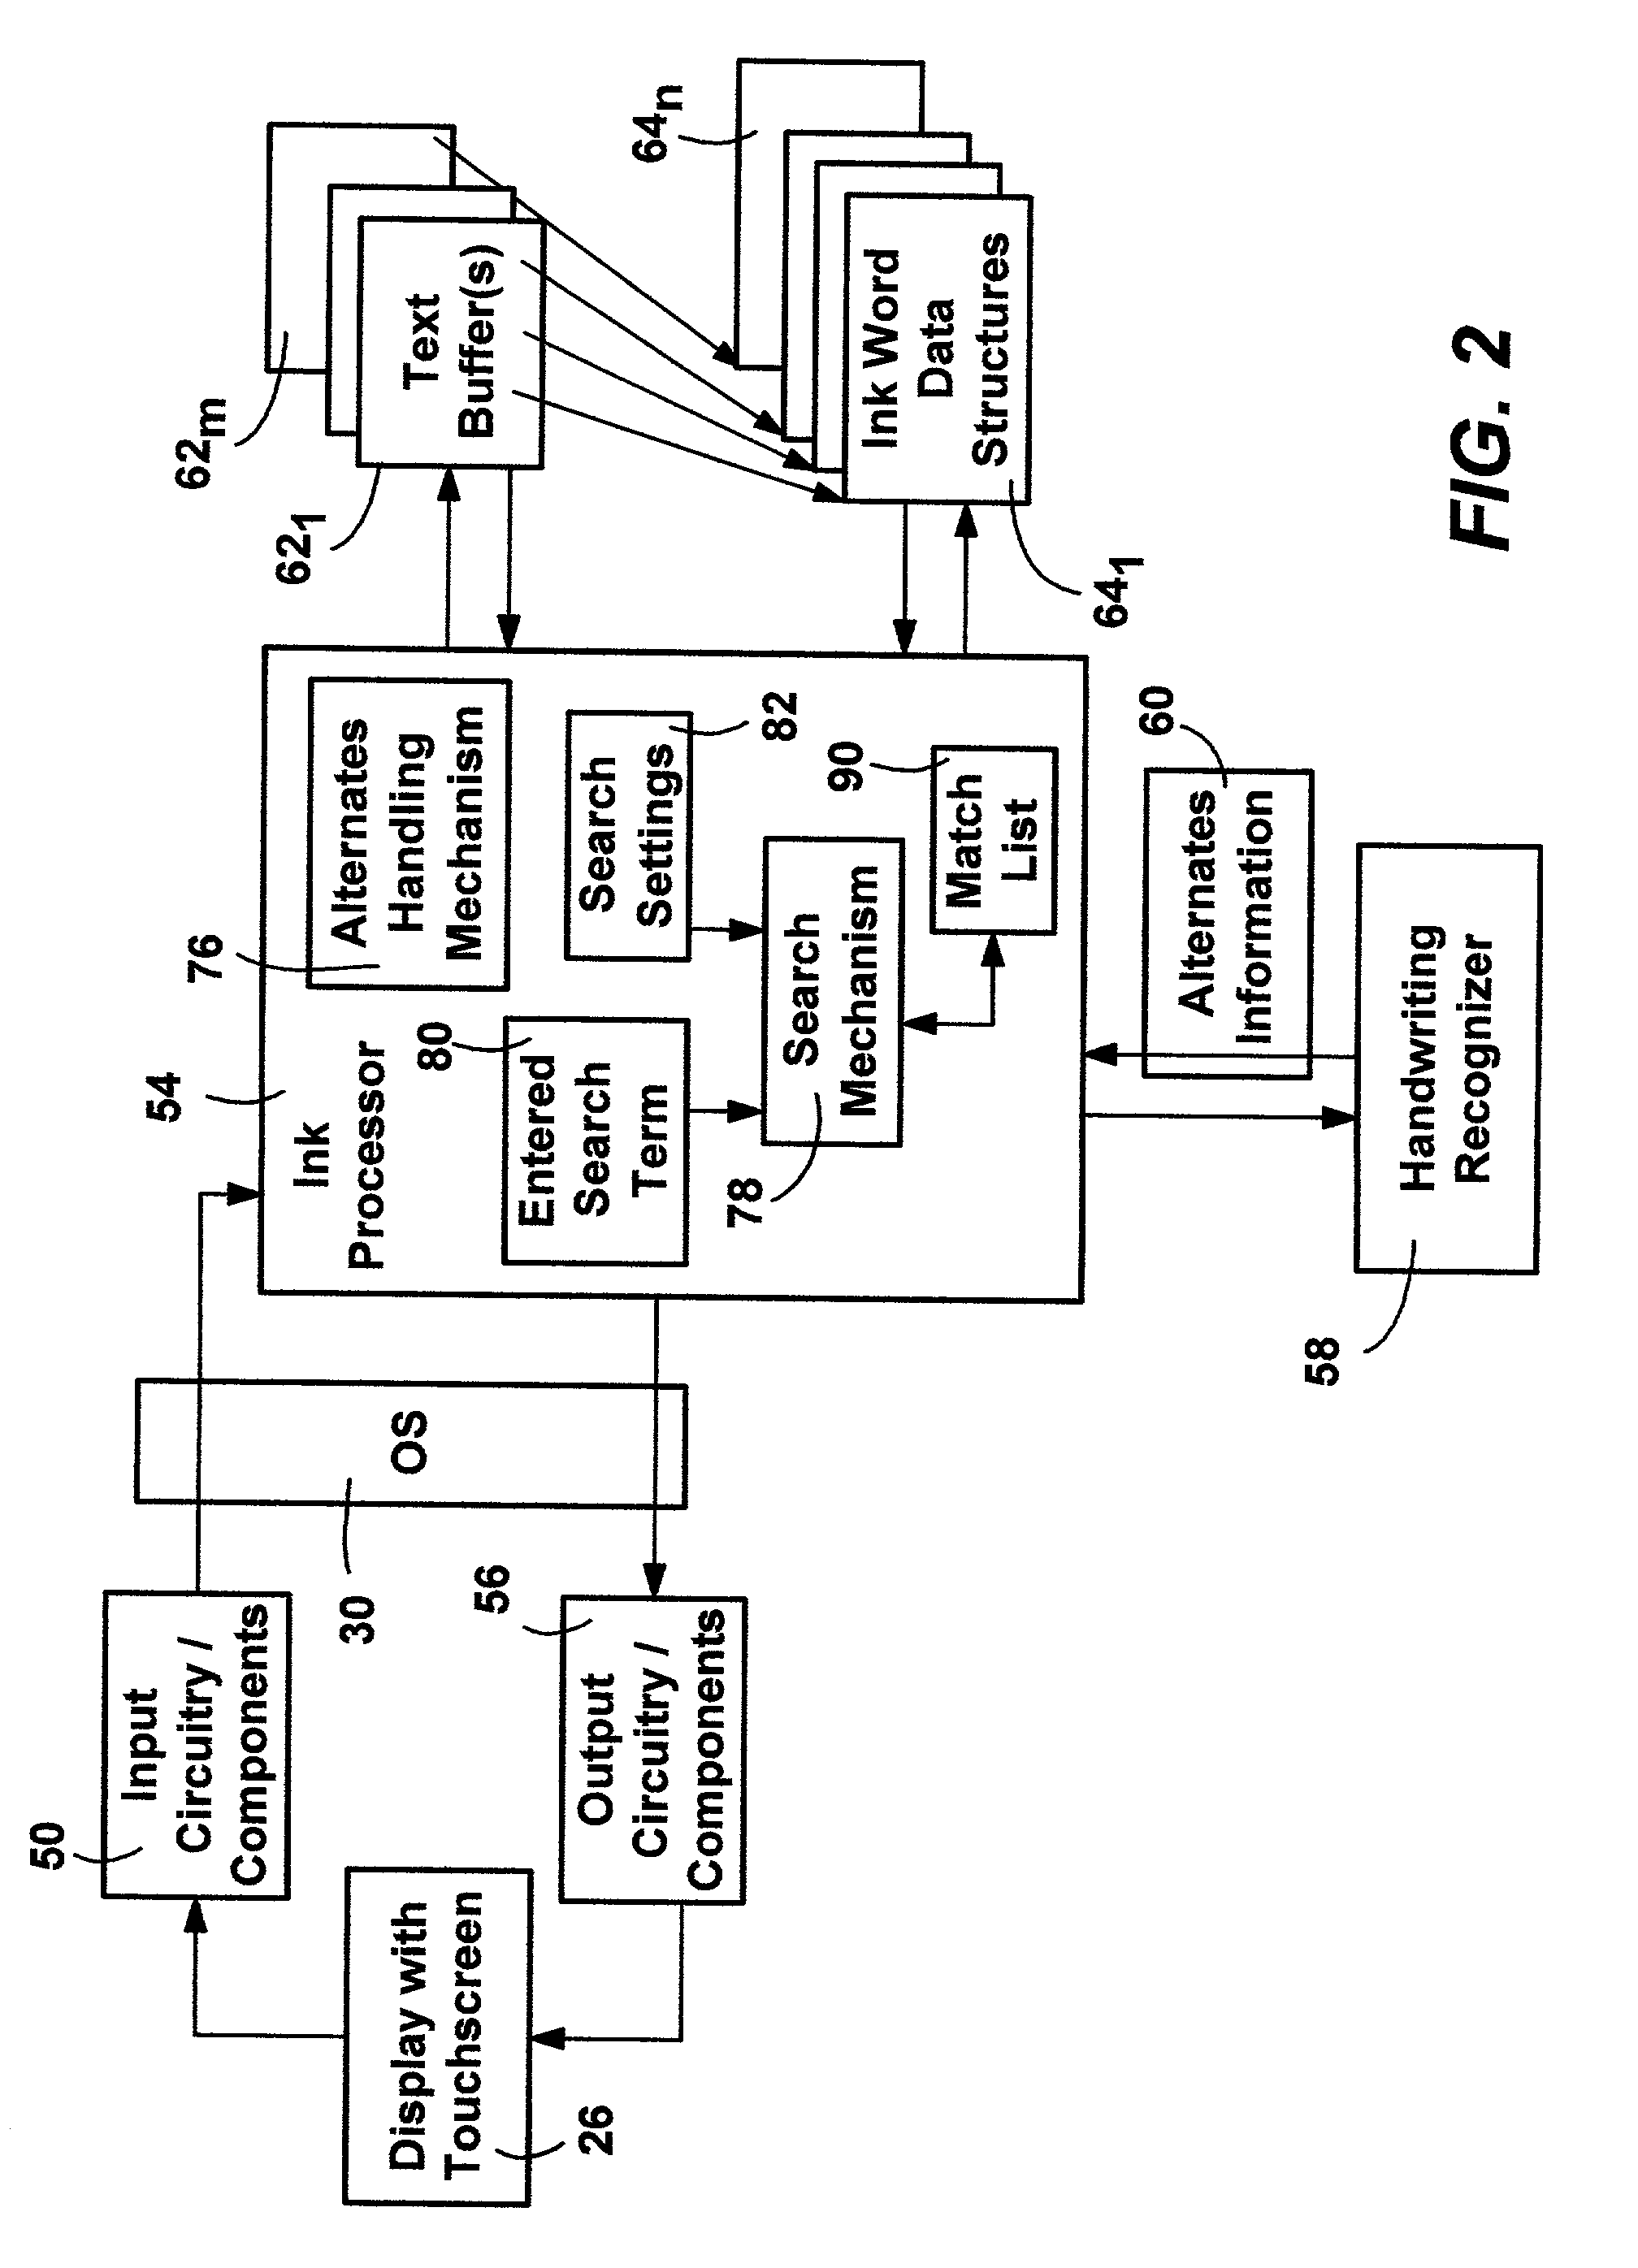 Method and system for searching for words and phrases in active and stored ink word documents